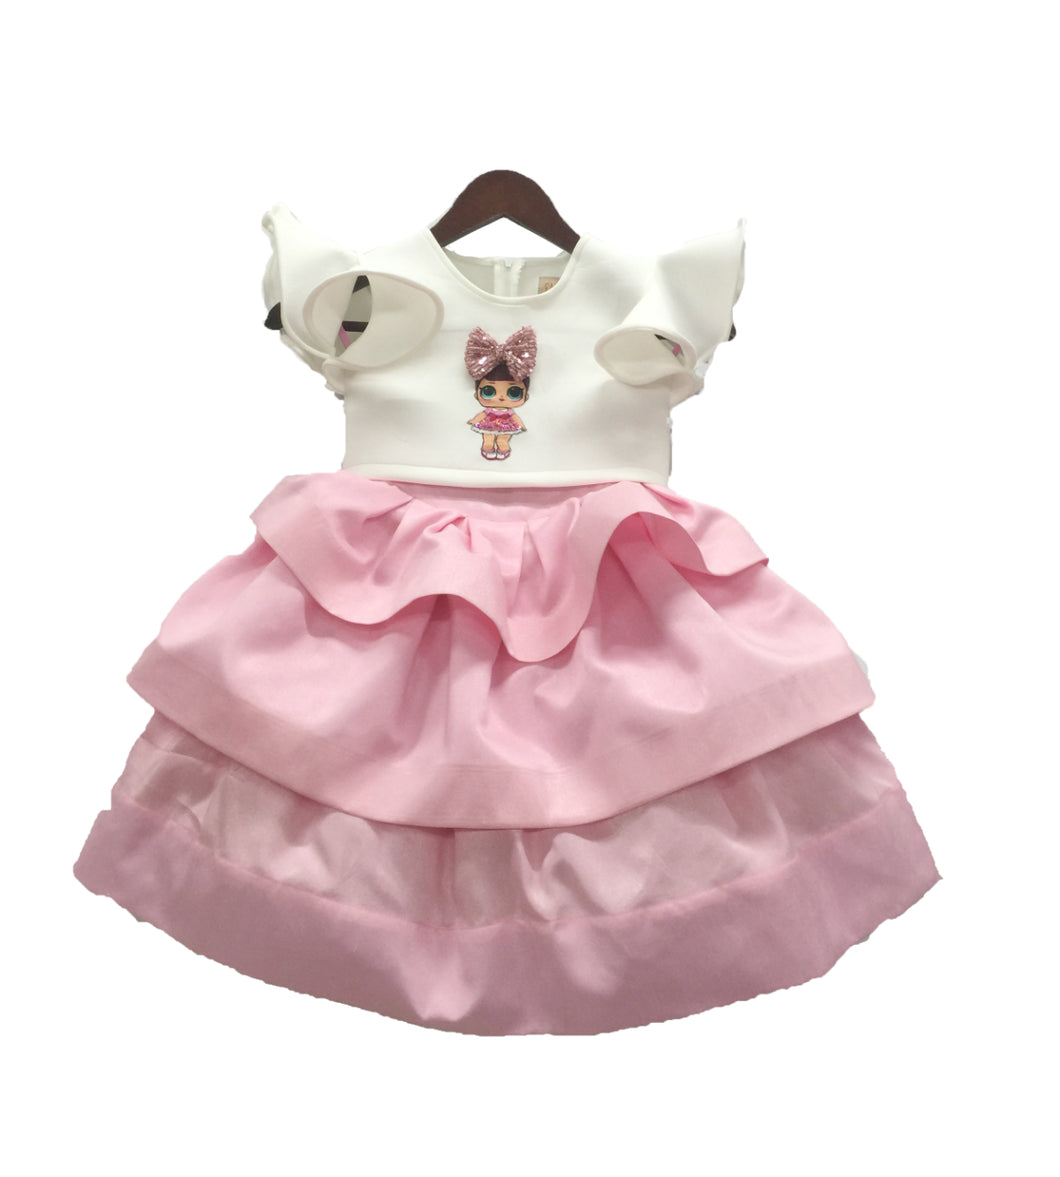 Girls Doll Emblem Crop Top With Baby Pink Skirt